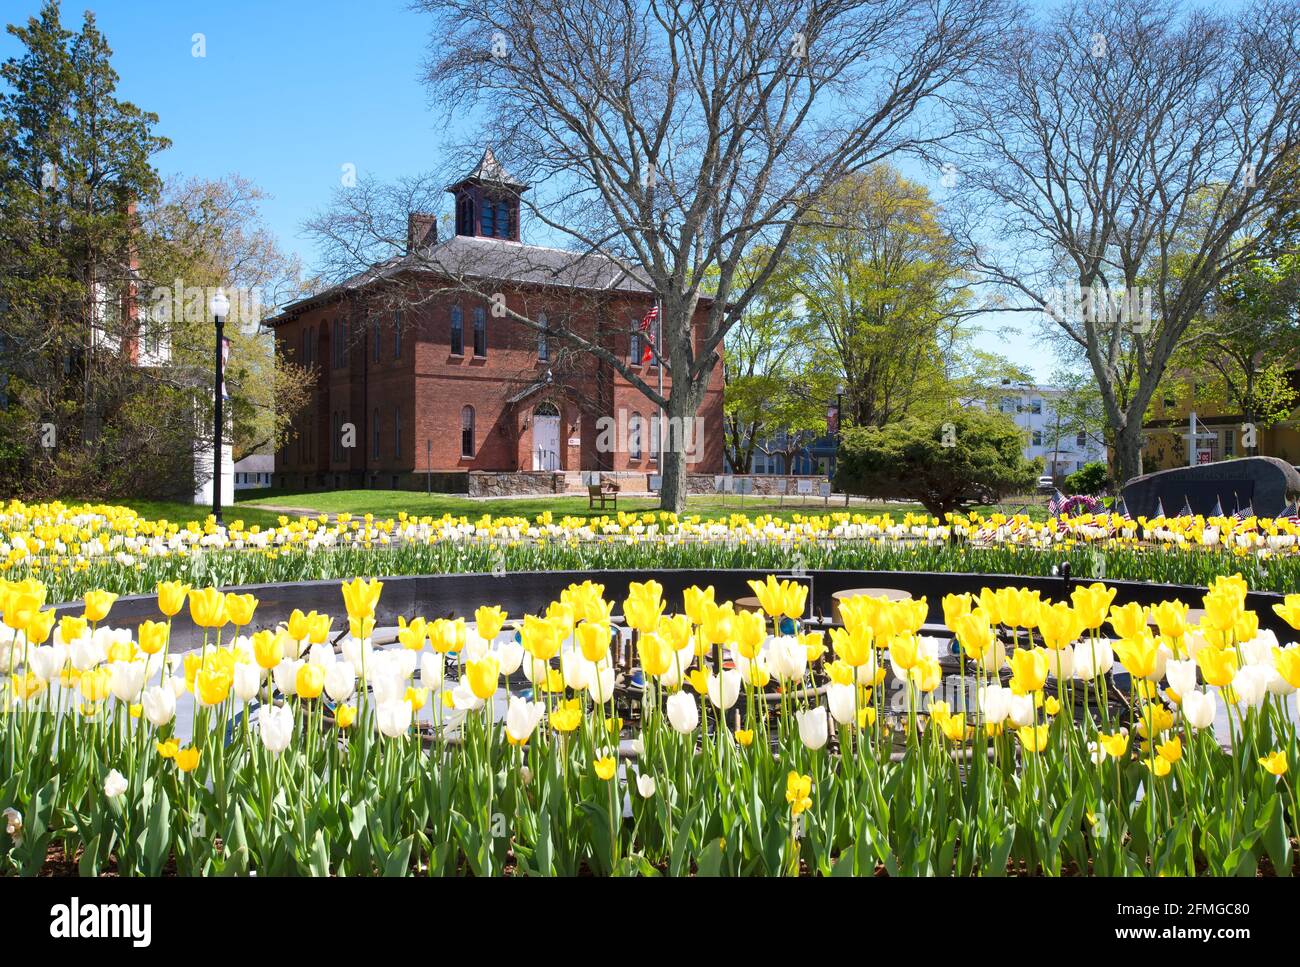 The Old Colony Historical Society in Taunton, Massachusetts as seen over various war memorials Stock Photo